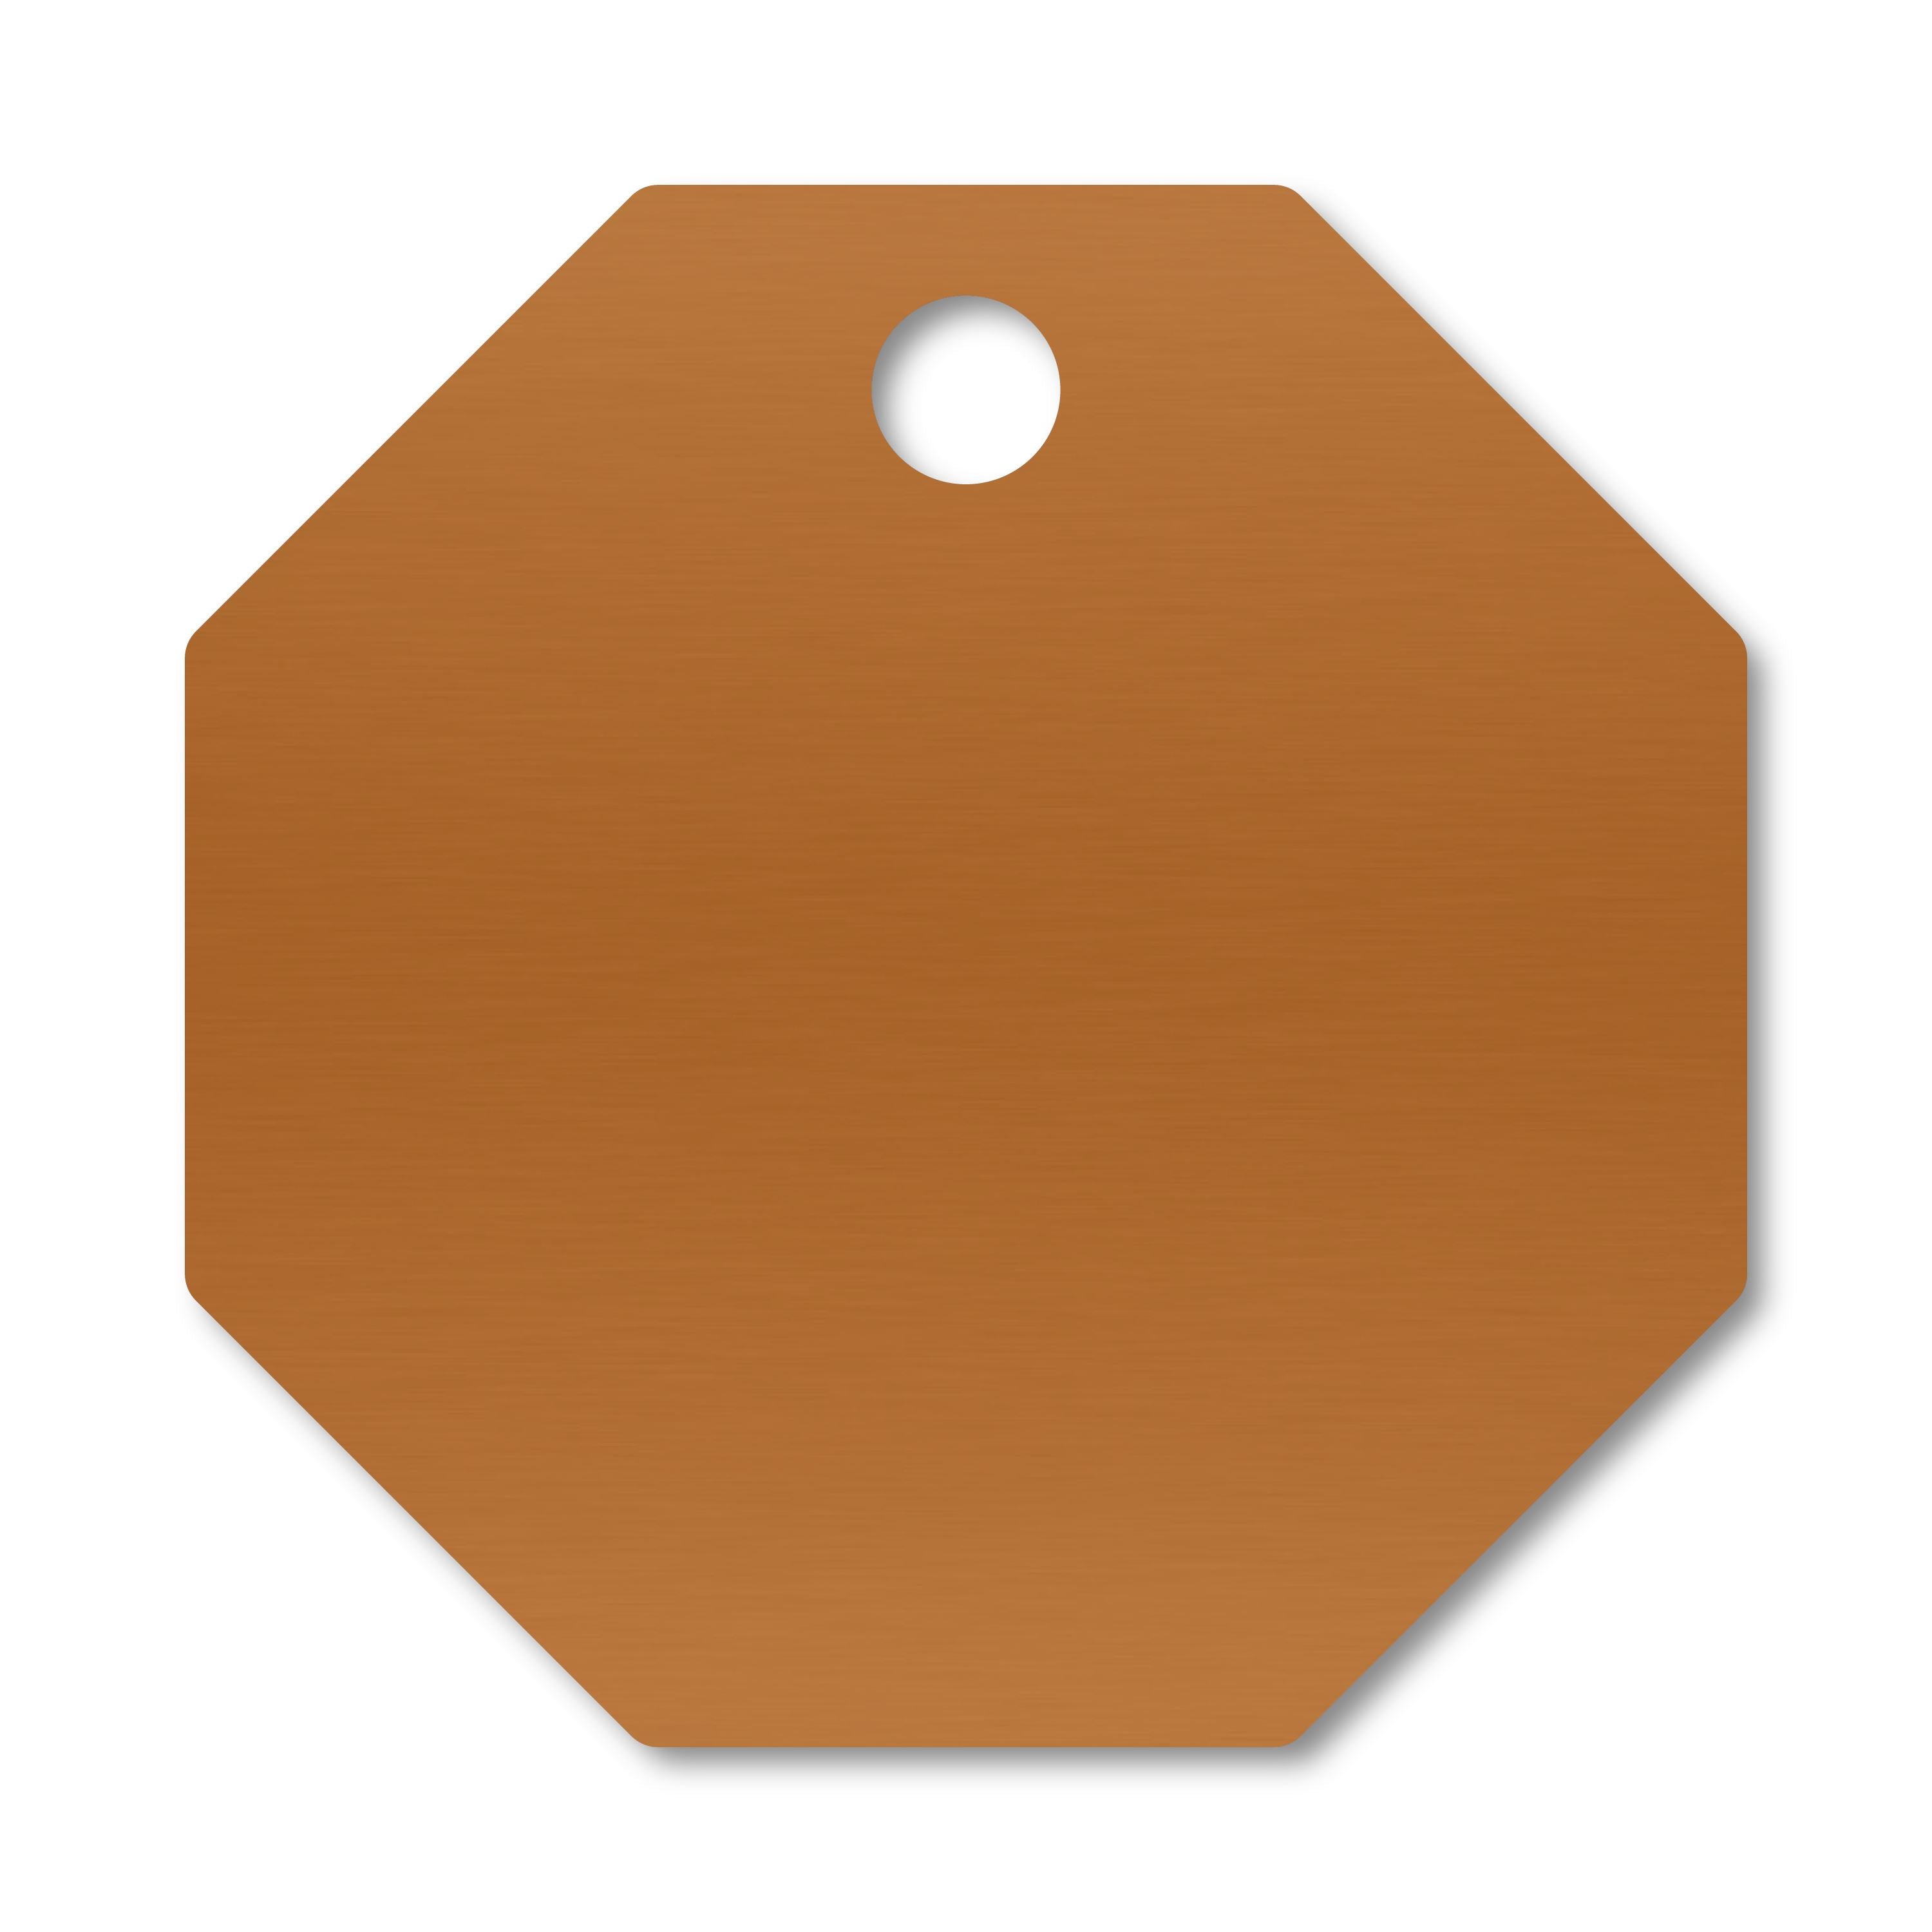 Anodized Aluminum Octagon Tags, 1" with 3/32" Hole, Laser Engraved Metal Tags Craftworks NW Orange 